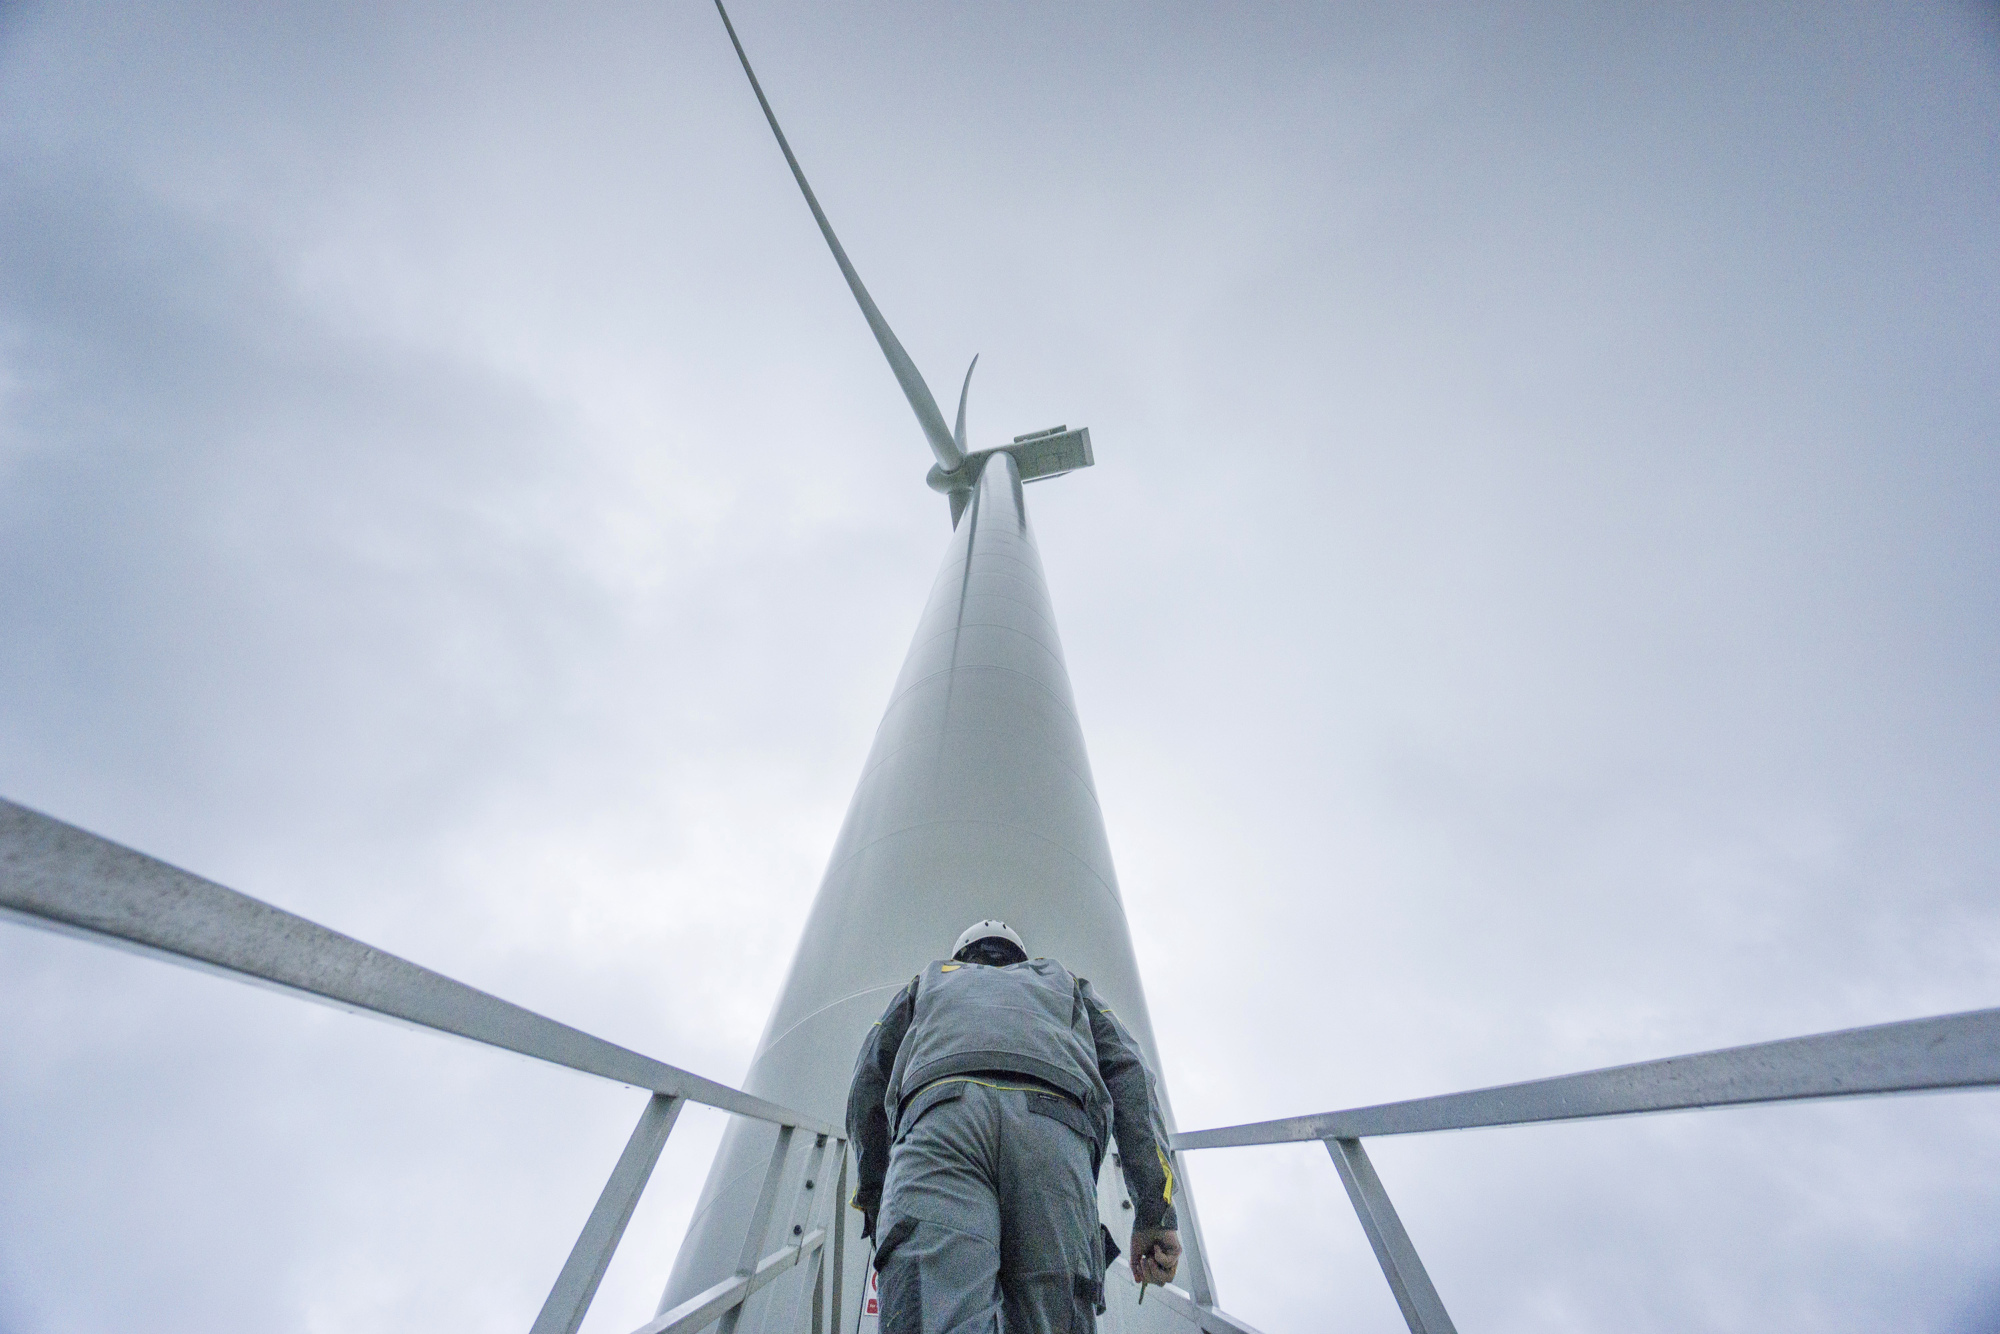 A worker climbs the access stairs to a wind turbine in Botievo, Ukraine.